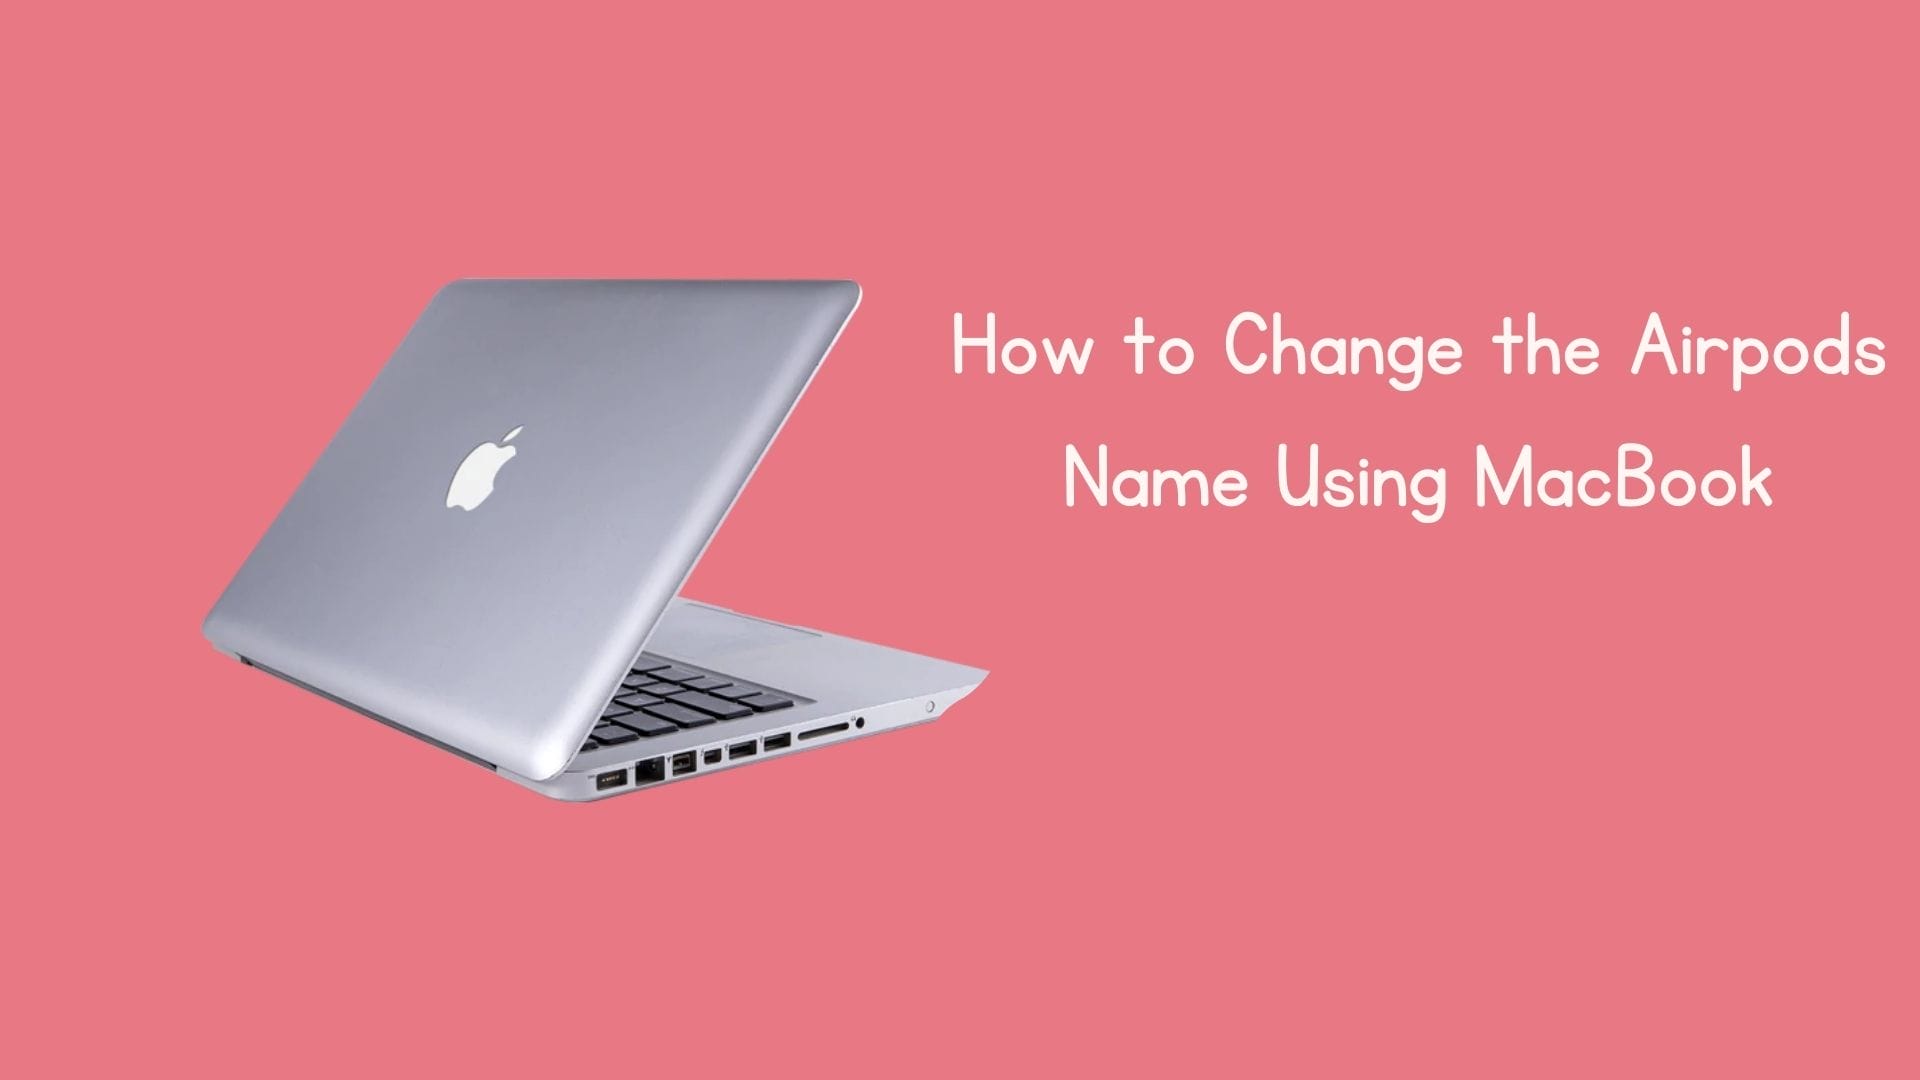 How to Change the Airpods Name Using MacBook